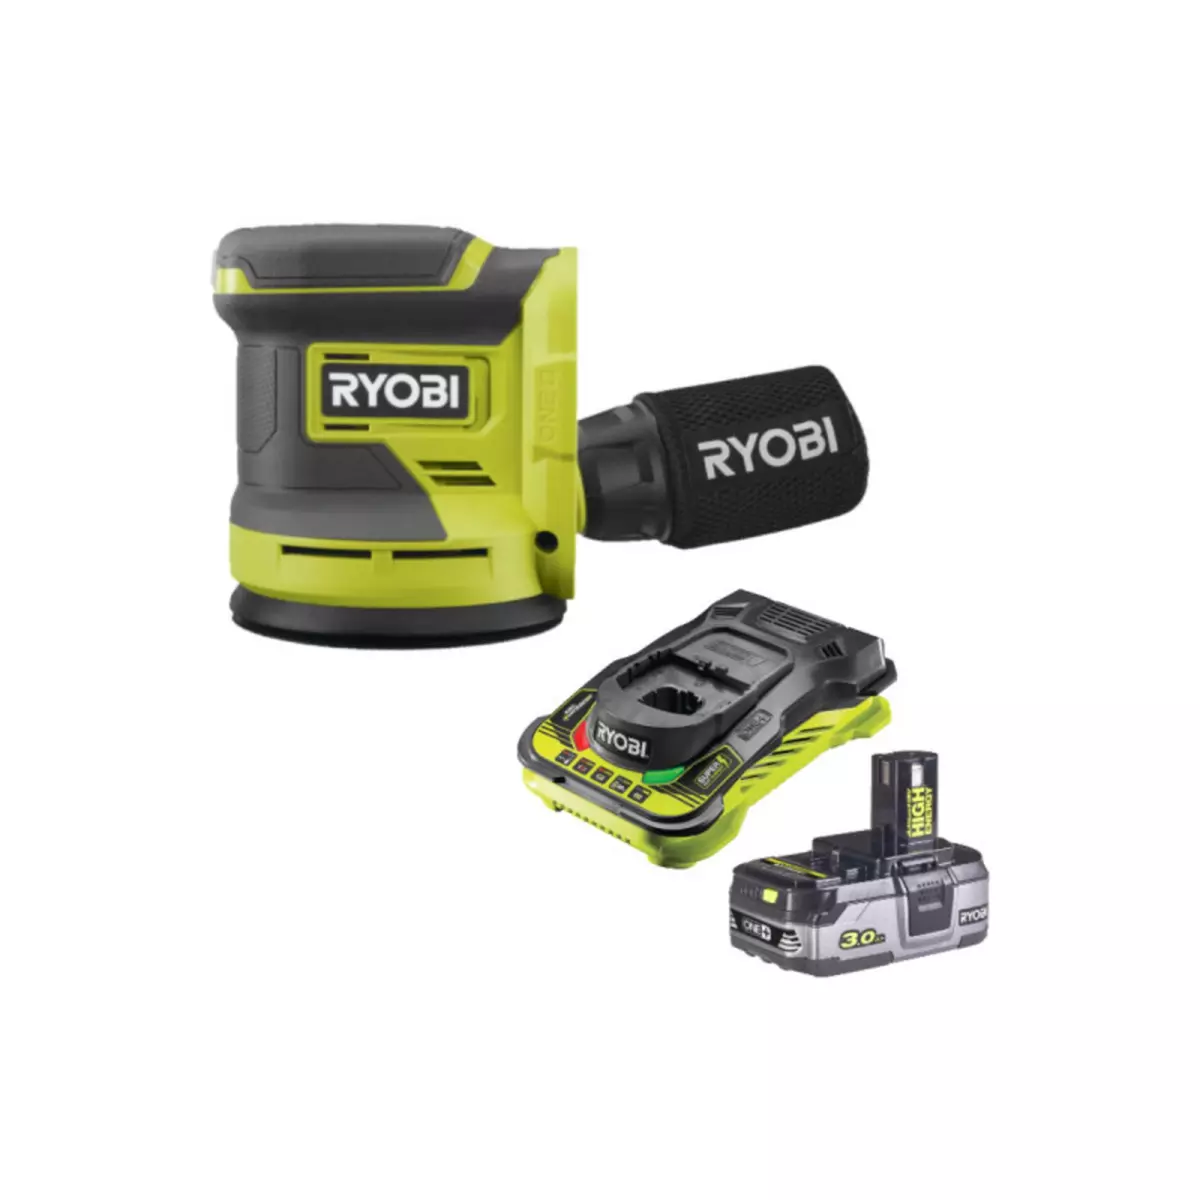 Ryobi Pack RYOBI Ponceuse excentrique 18V OnePlus RROS18-0 - 1 Batterie 3.0Ah High Energy - 1 Chargeur ul